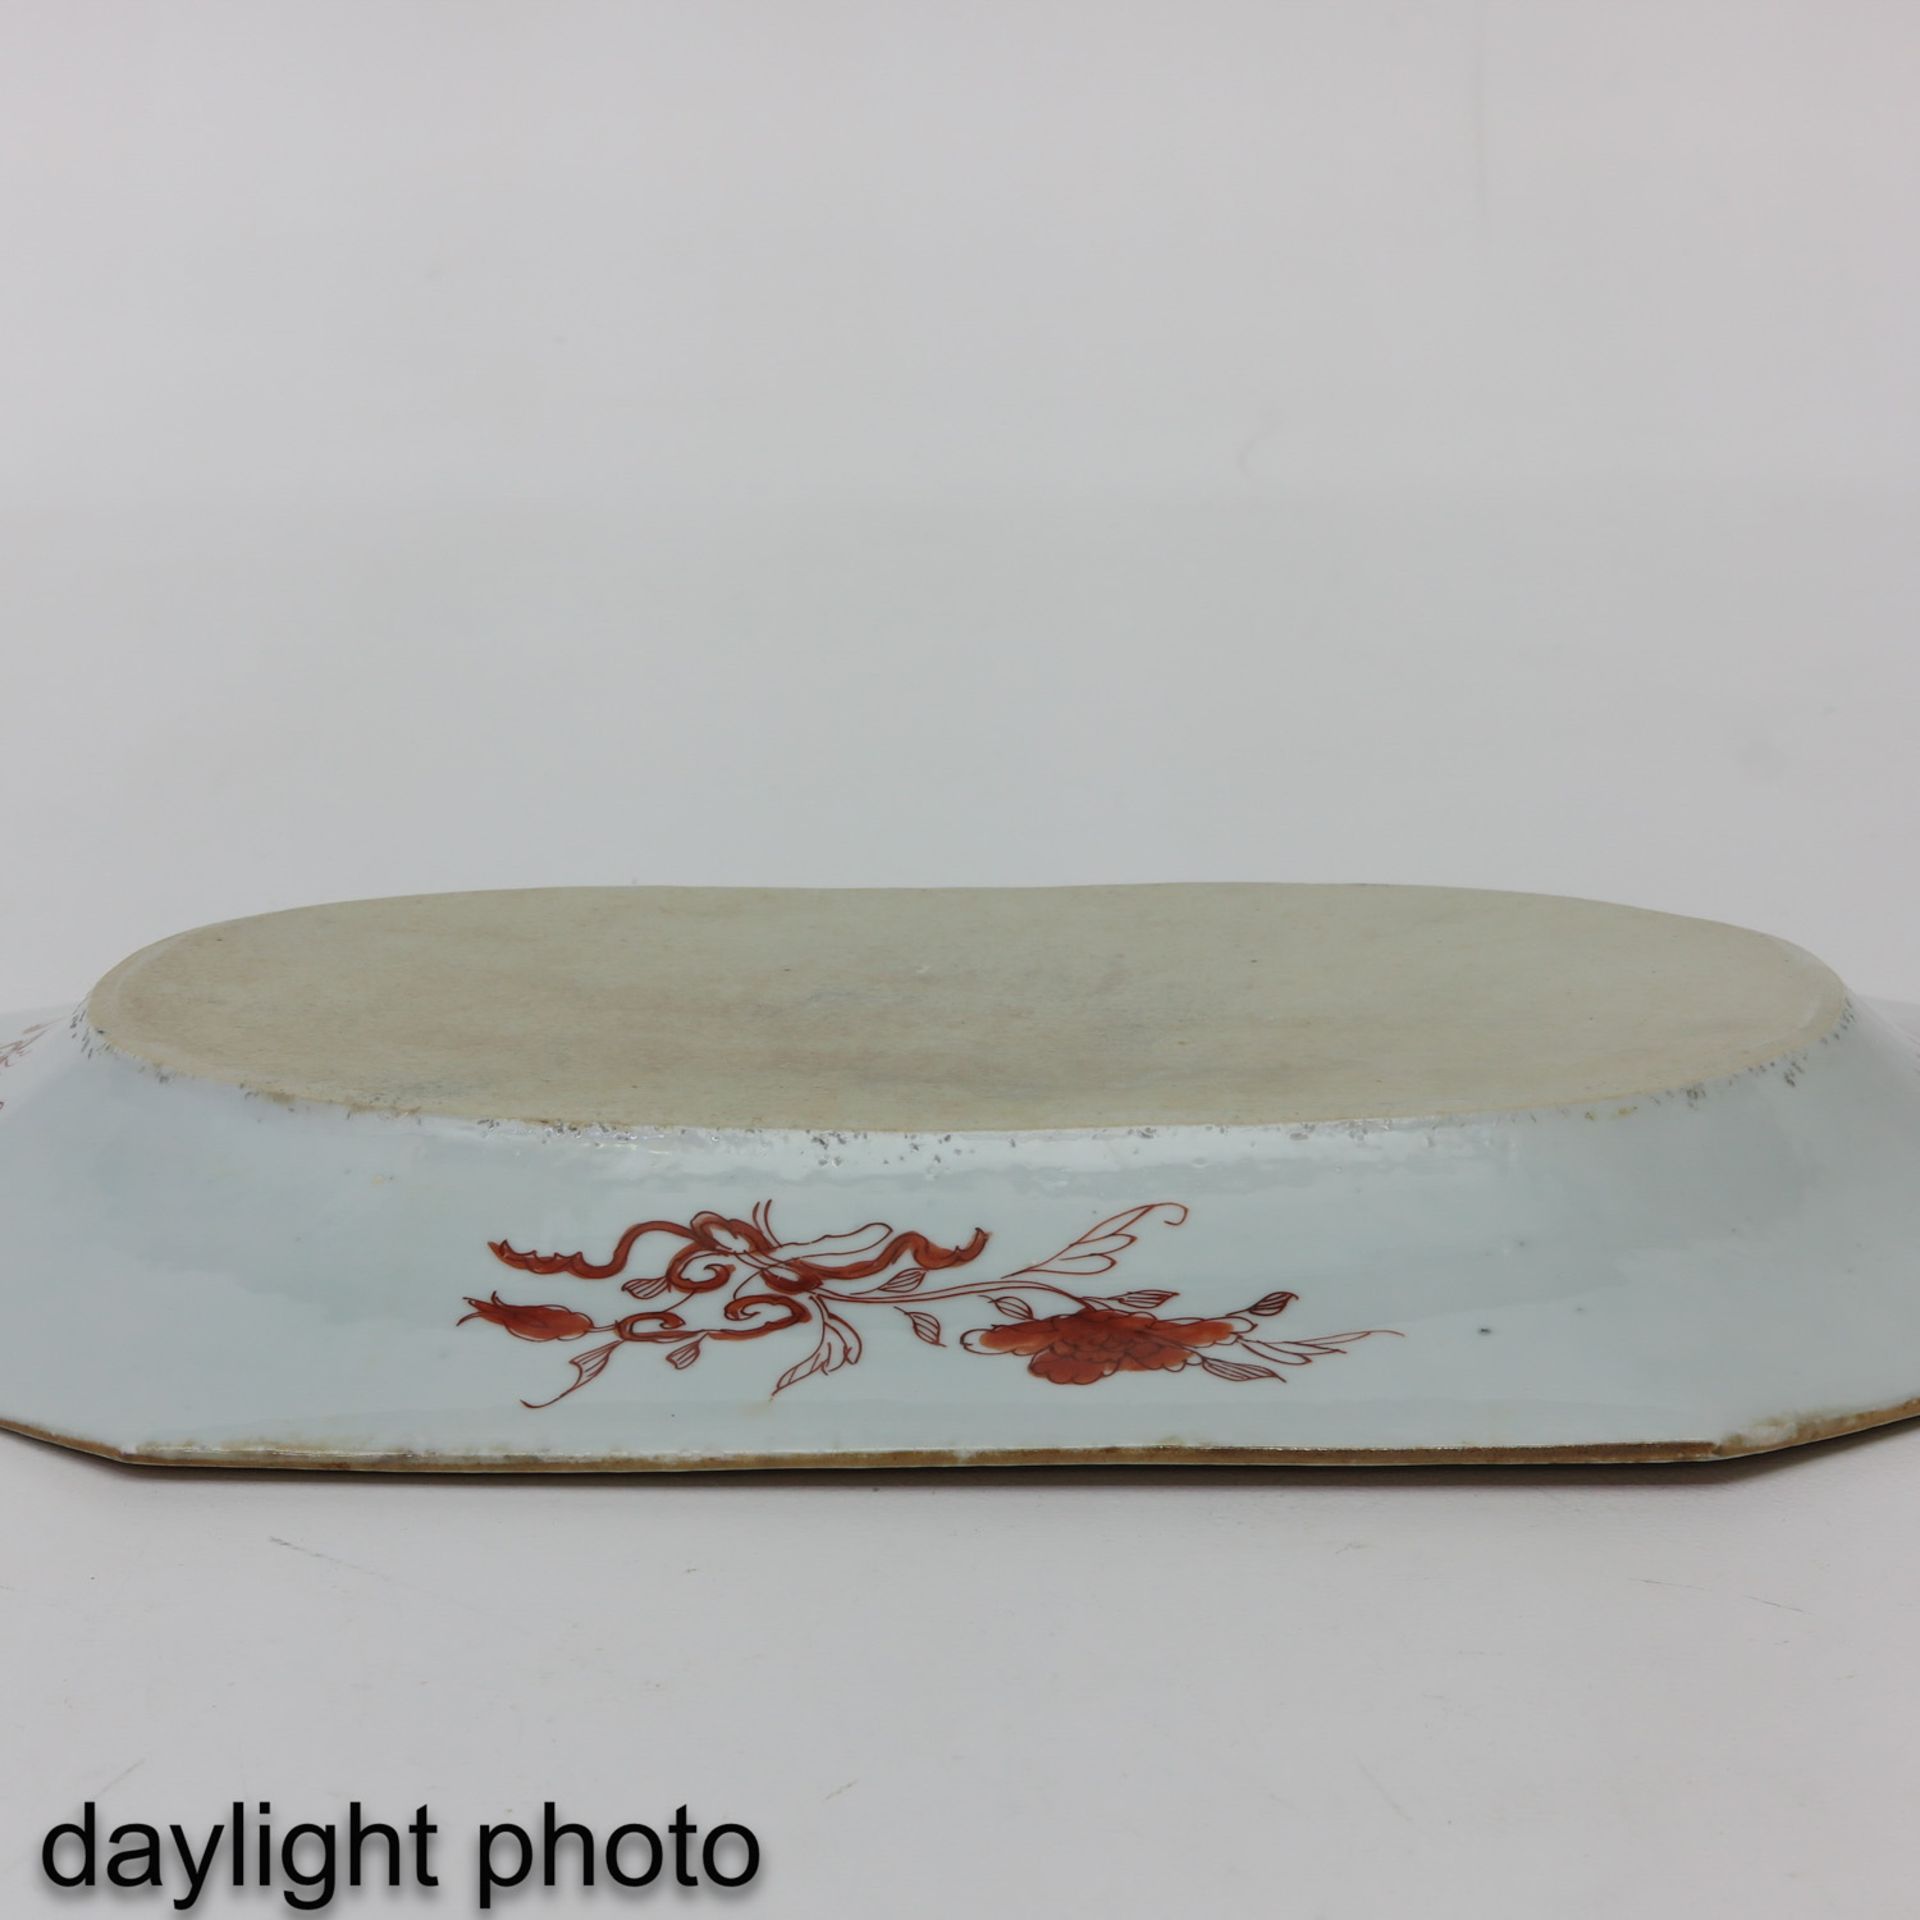 A Polychrome Decor Serving Tray - Image 6 of 7